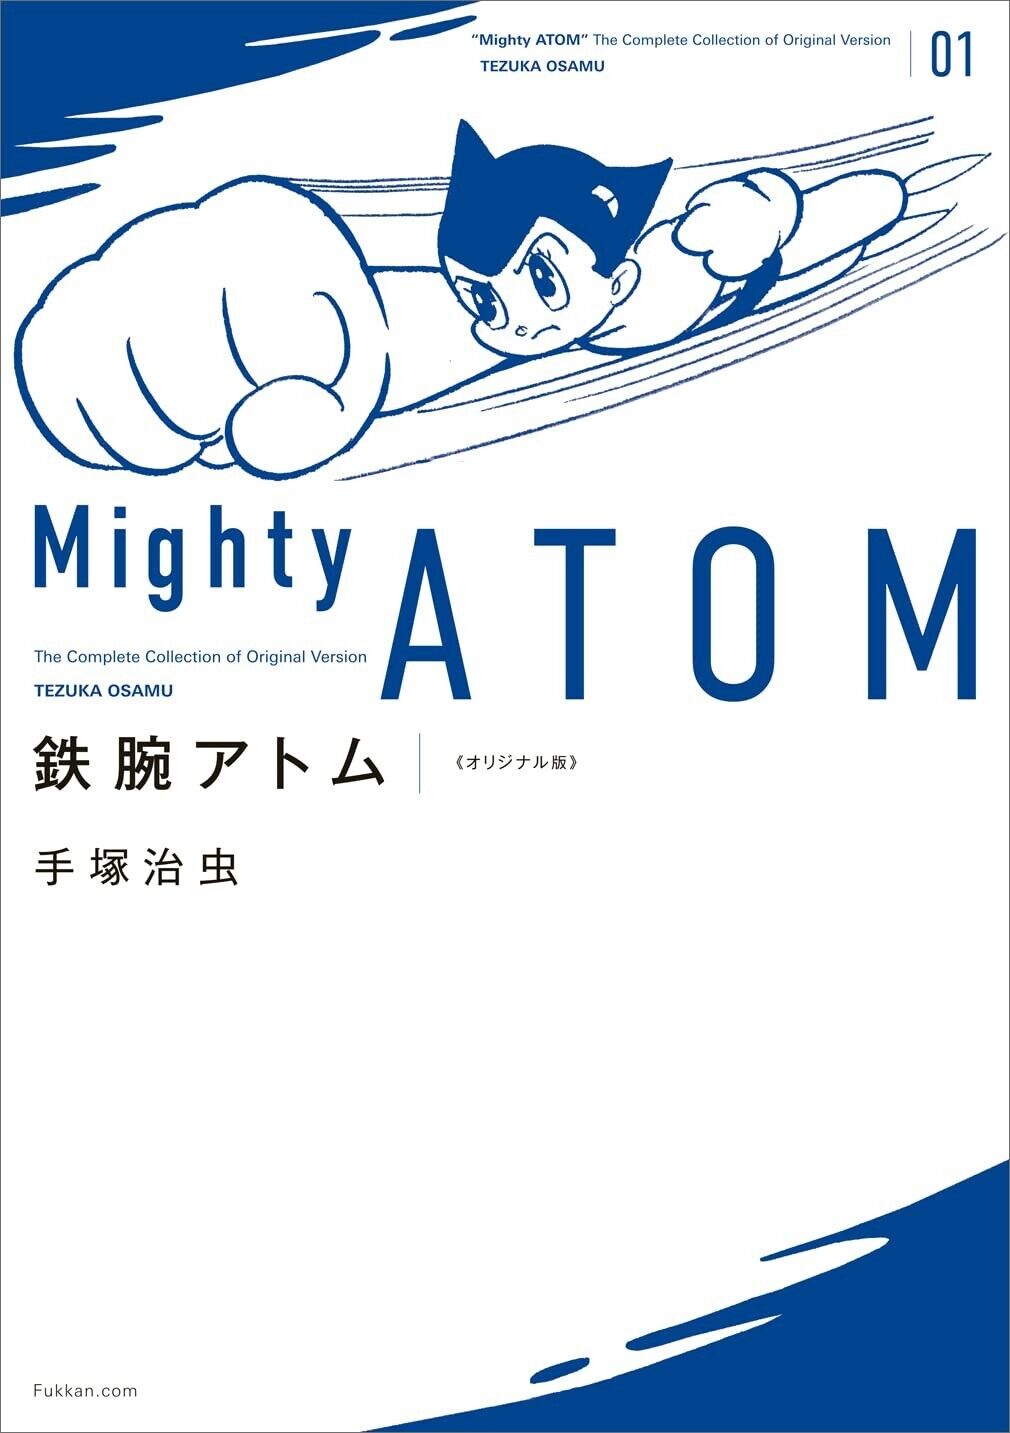 Mighty Atom 01 The Complete Collection of Original Ver. in Japanese Tezuka Osamu